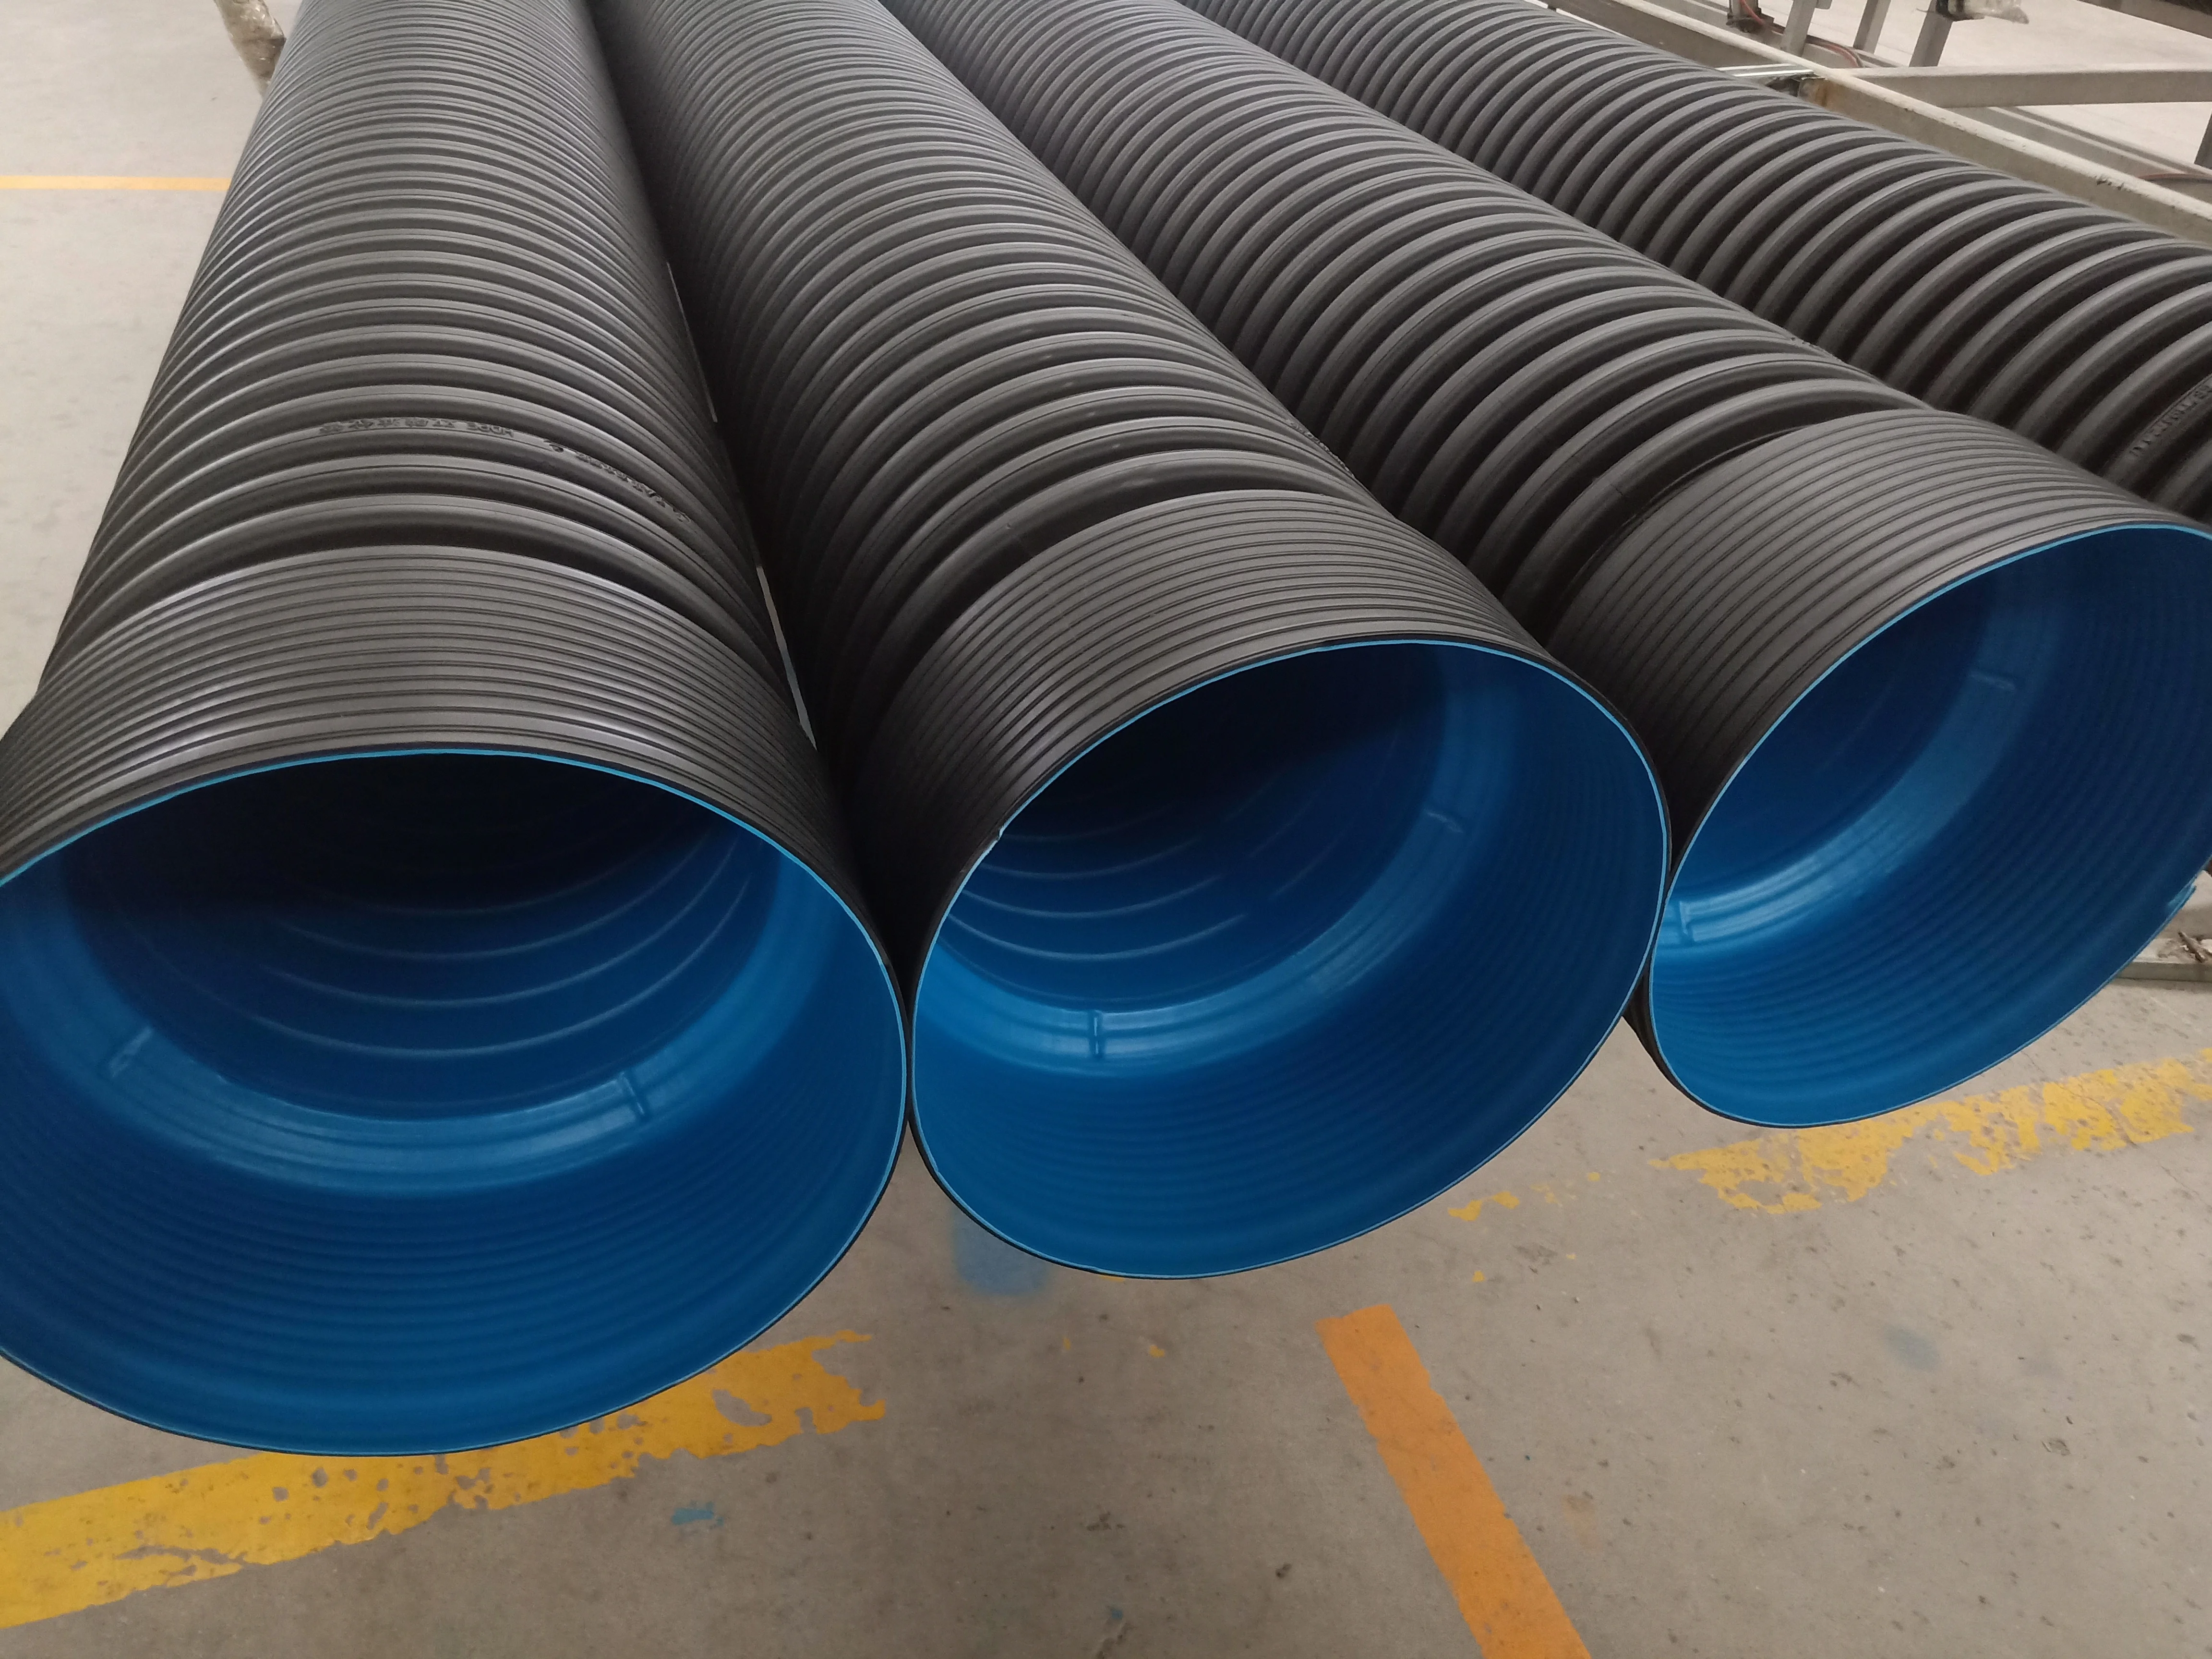 Hdpe double wall corrugated pipe SN8 800MM 1000mm 1200mm Drainage pipe dwc hdpe plastic tubes/culvert pipe/100 corrugated pipe